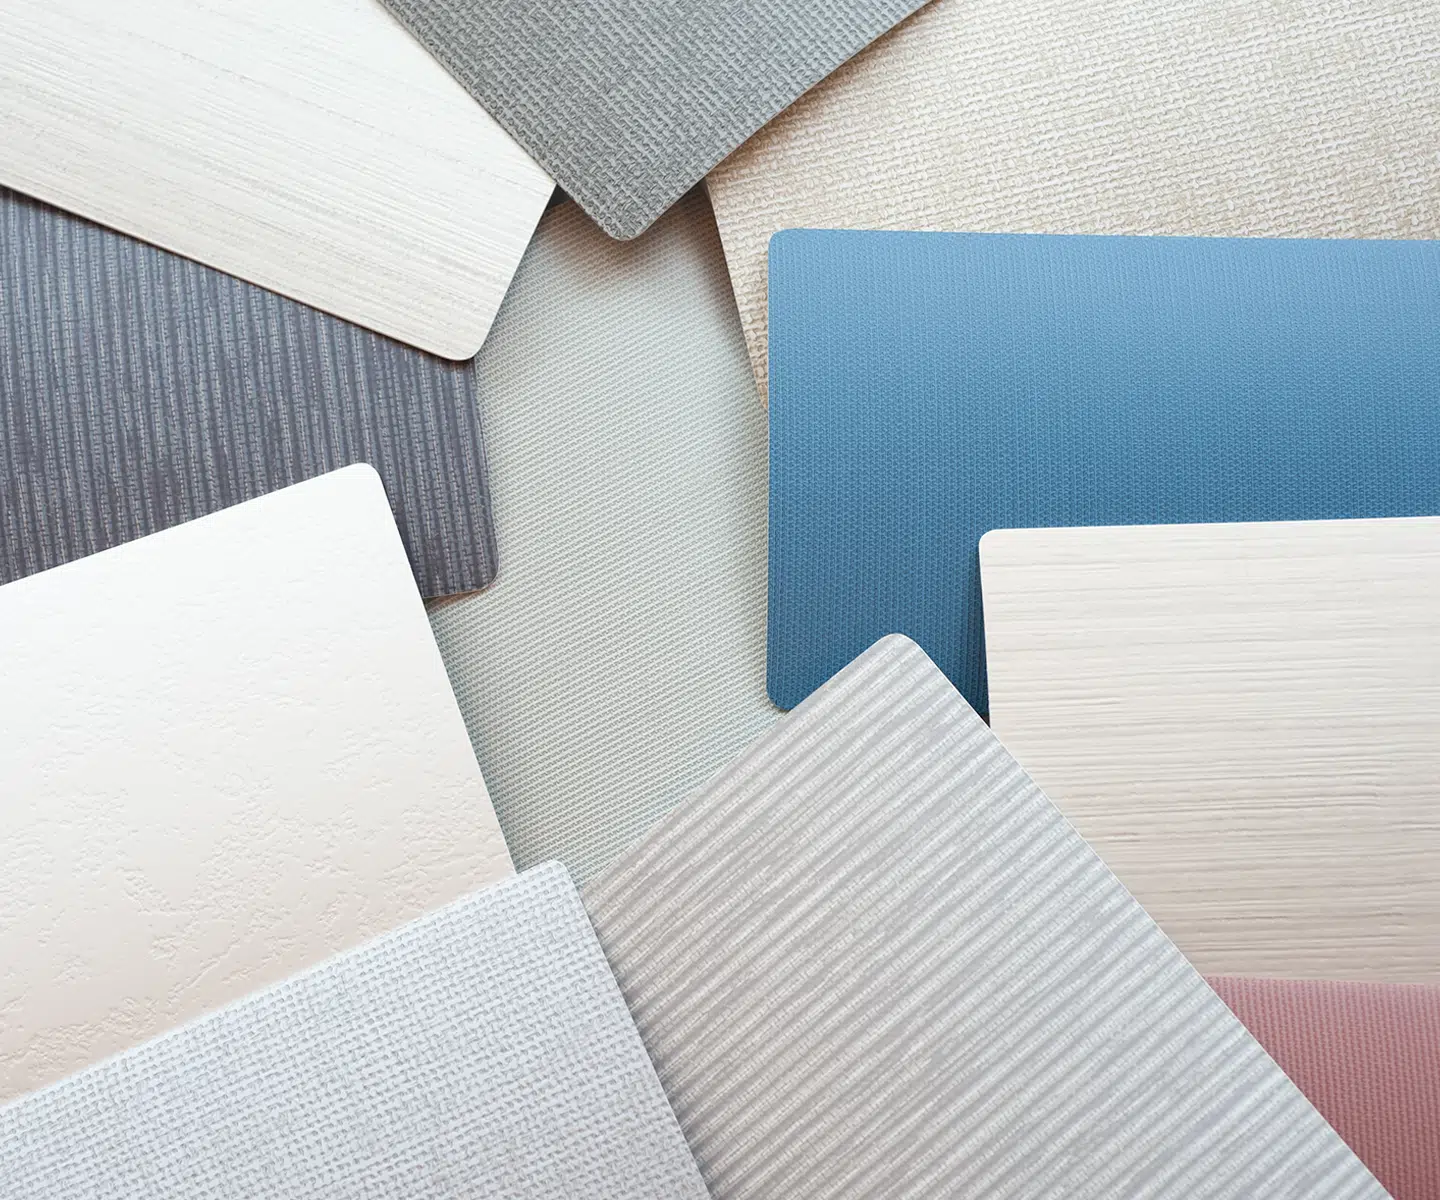 Swatches of the many enticing color options for vertical blinds